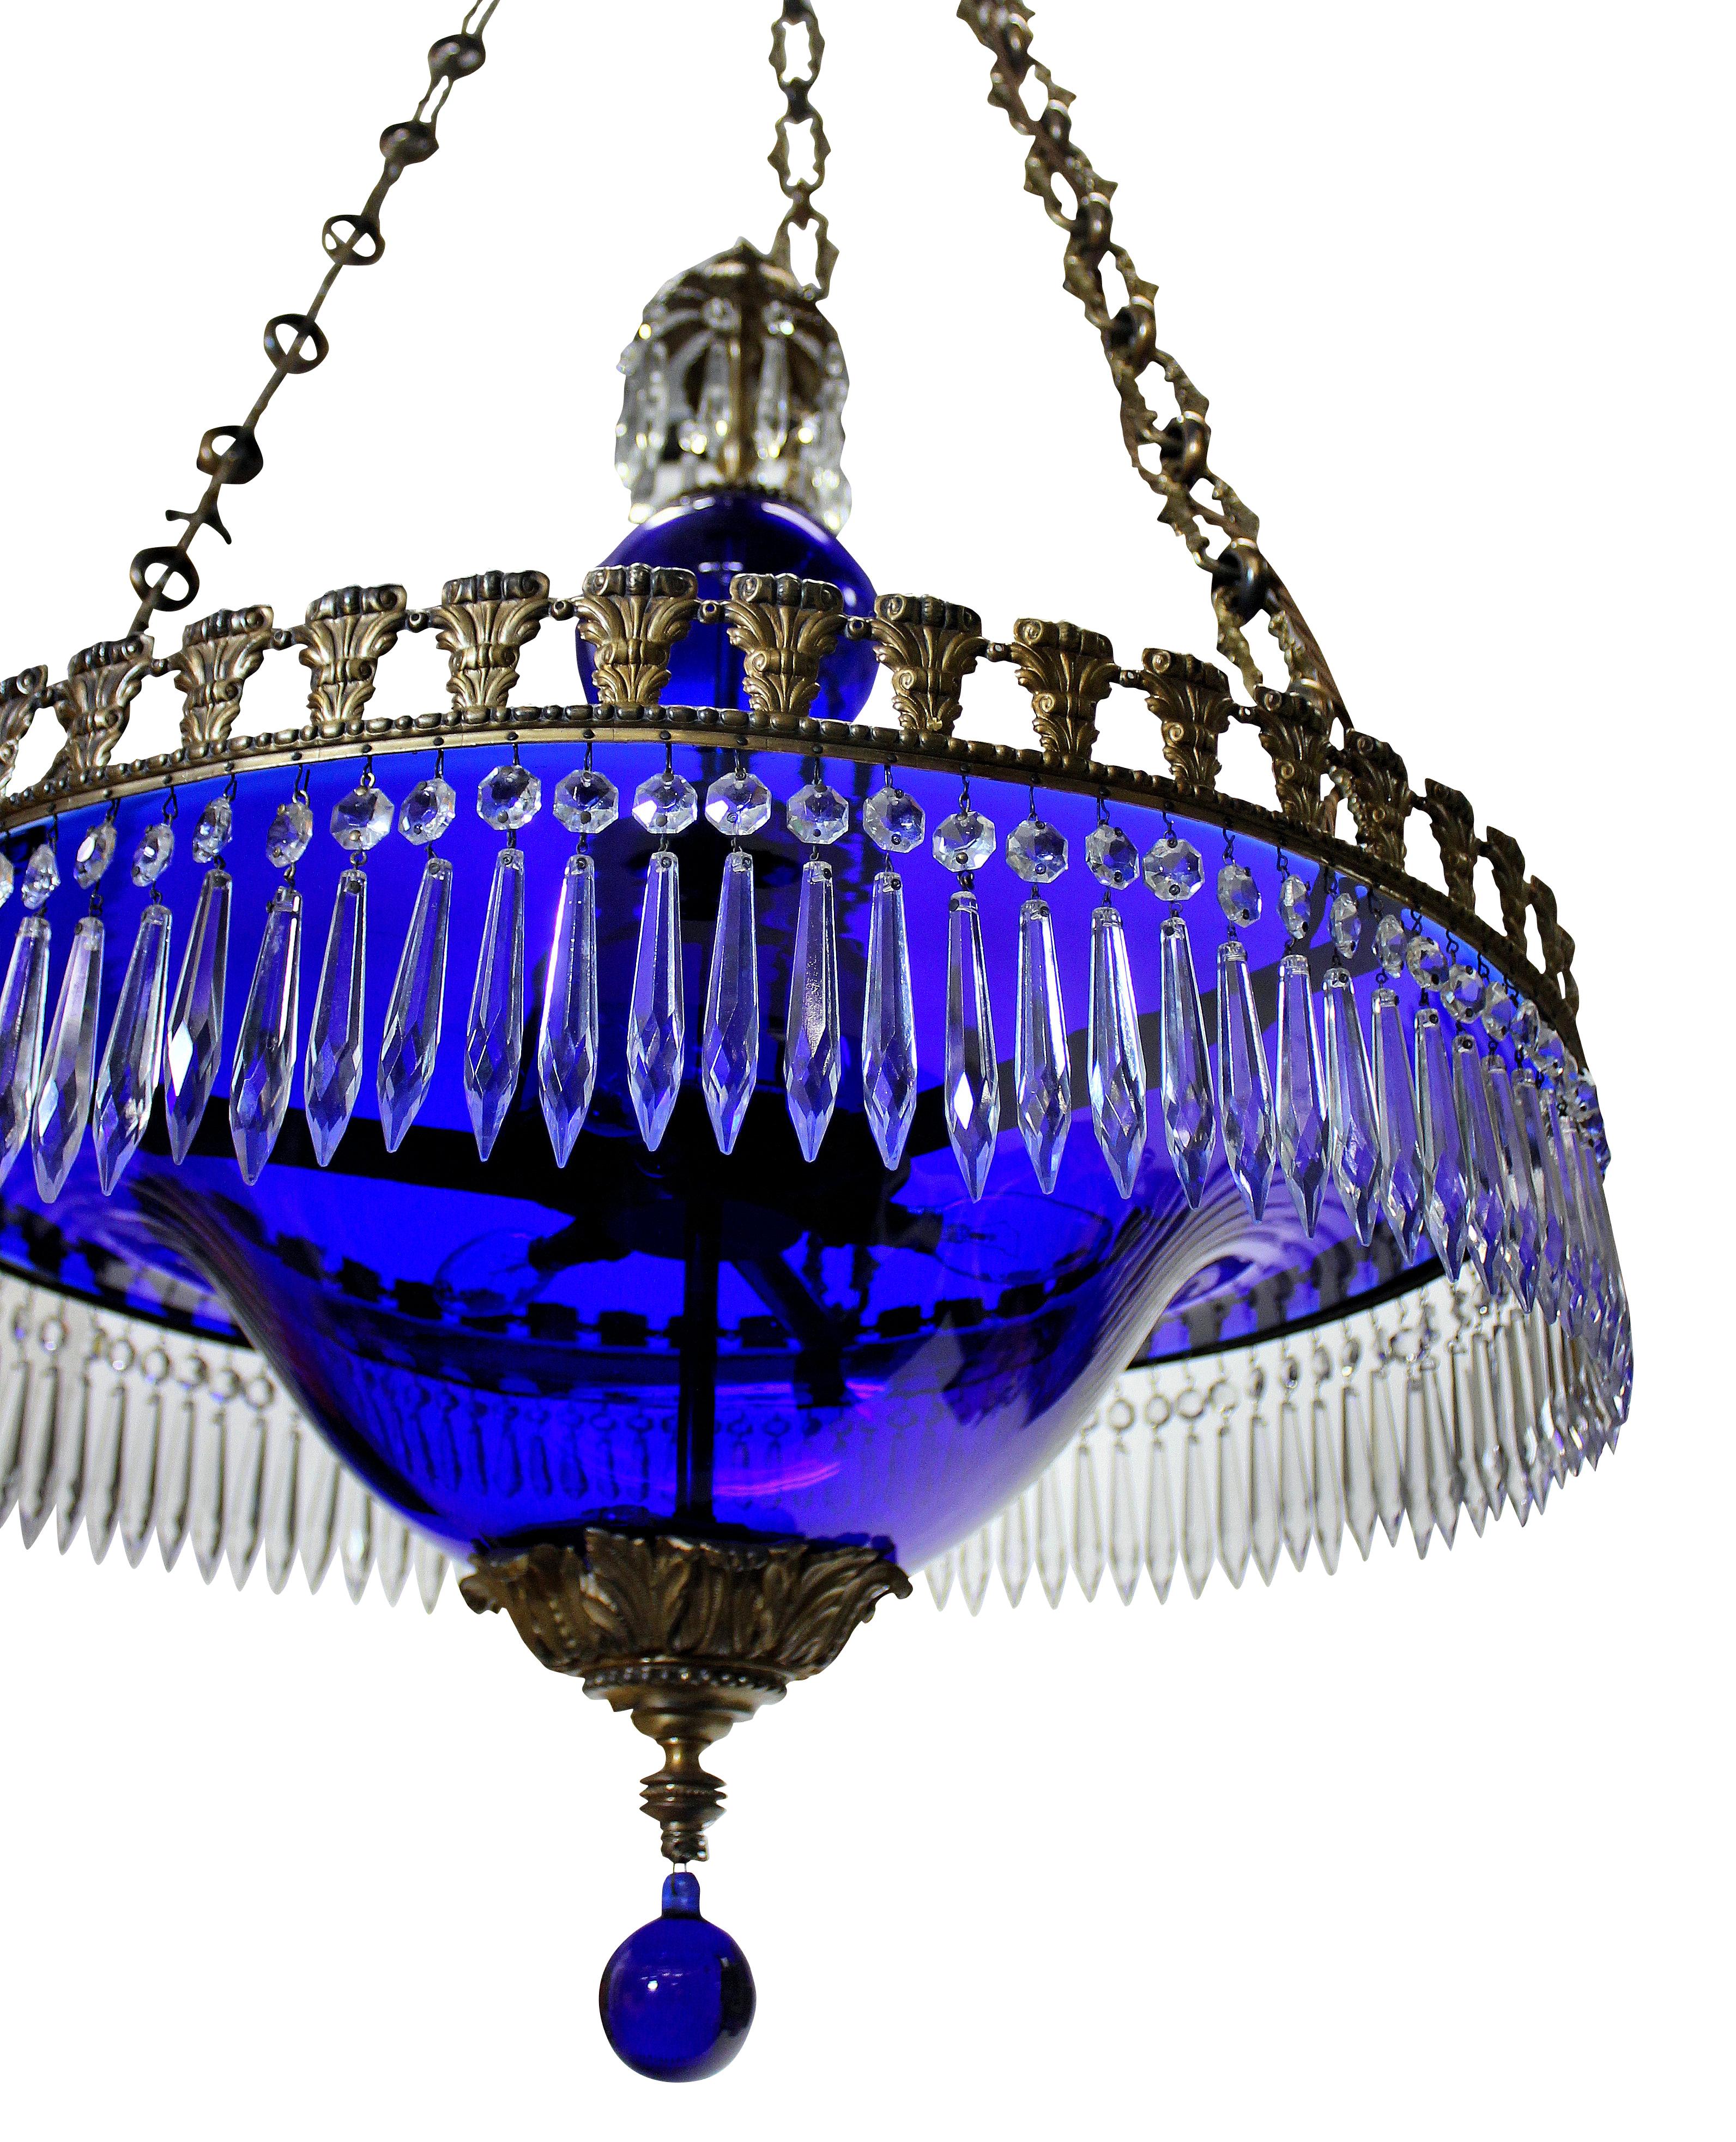 A fine Baltic neoclassical chandelier in blue glass, with gilt bronze frame and hung throughout with cut glass pendants.